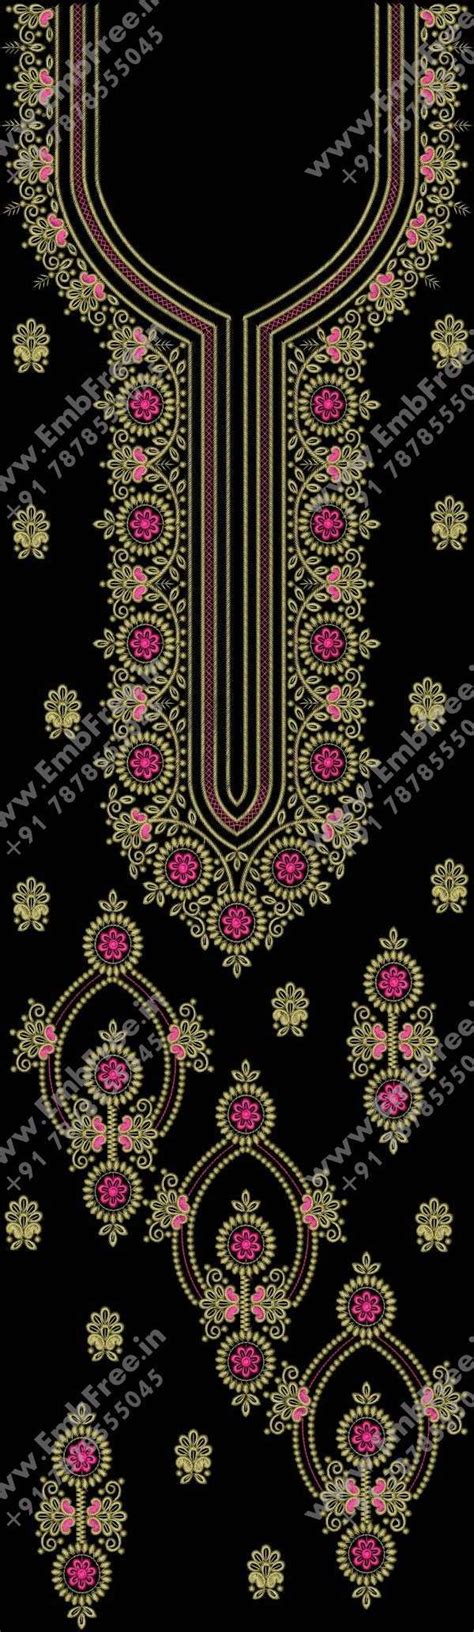 Dress Embroidery Design In 2021 Embroidery Designs Embroidery